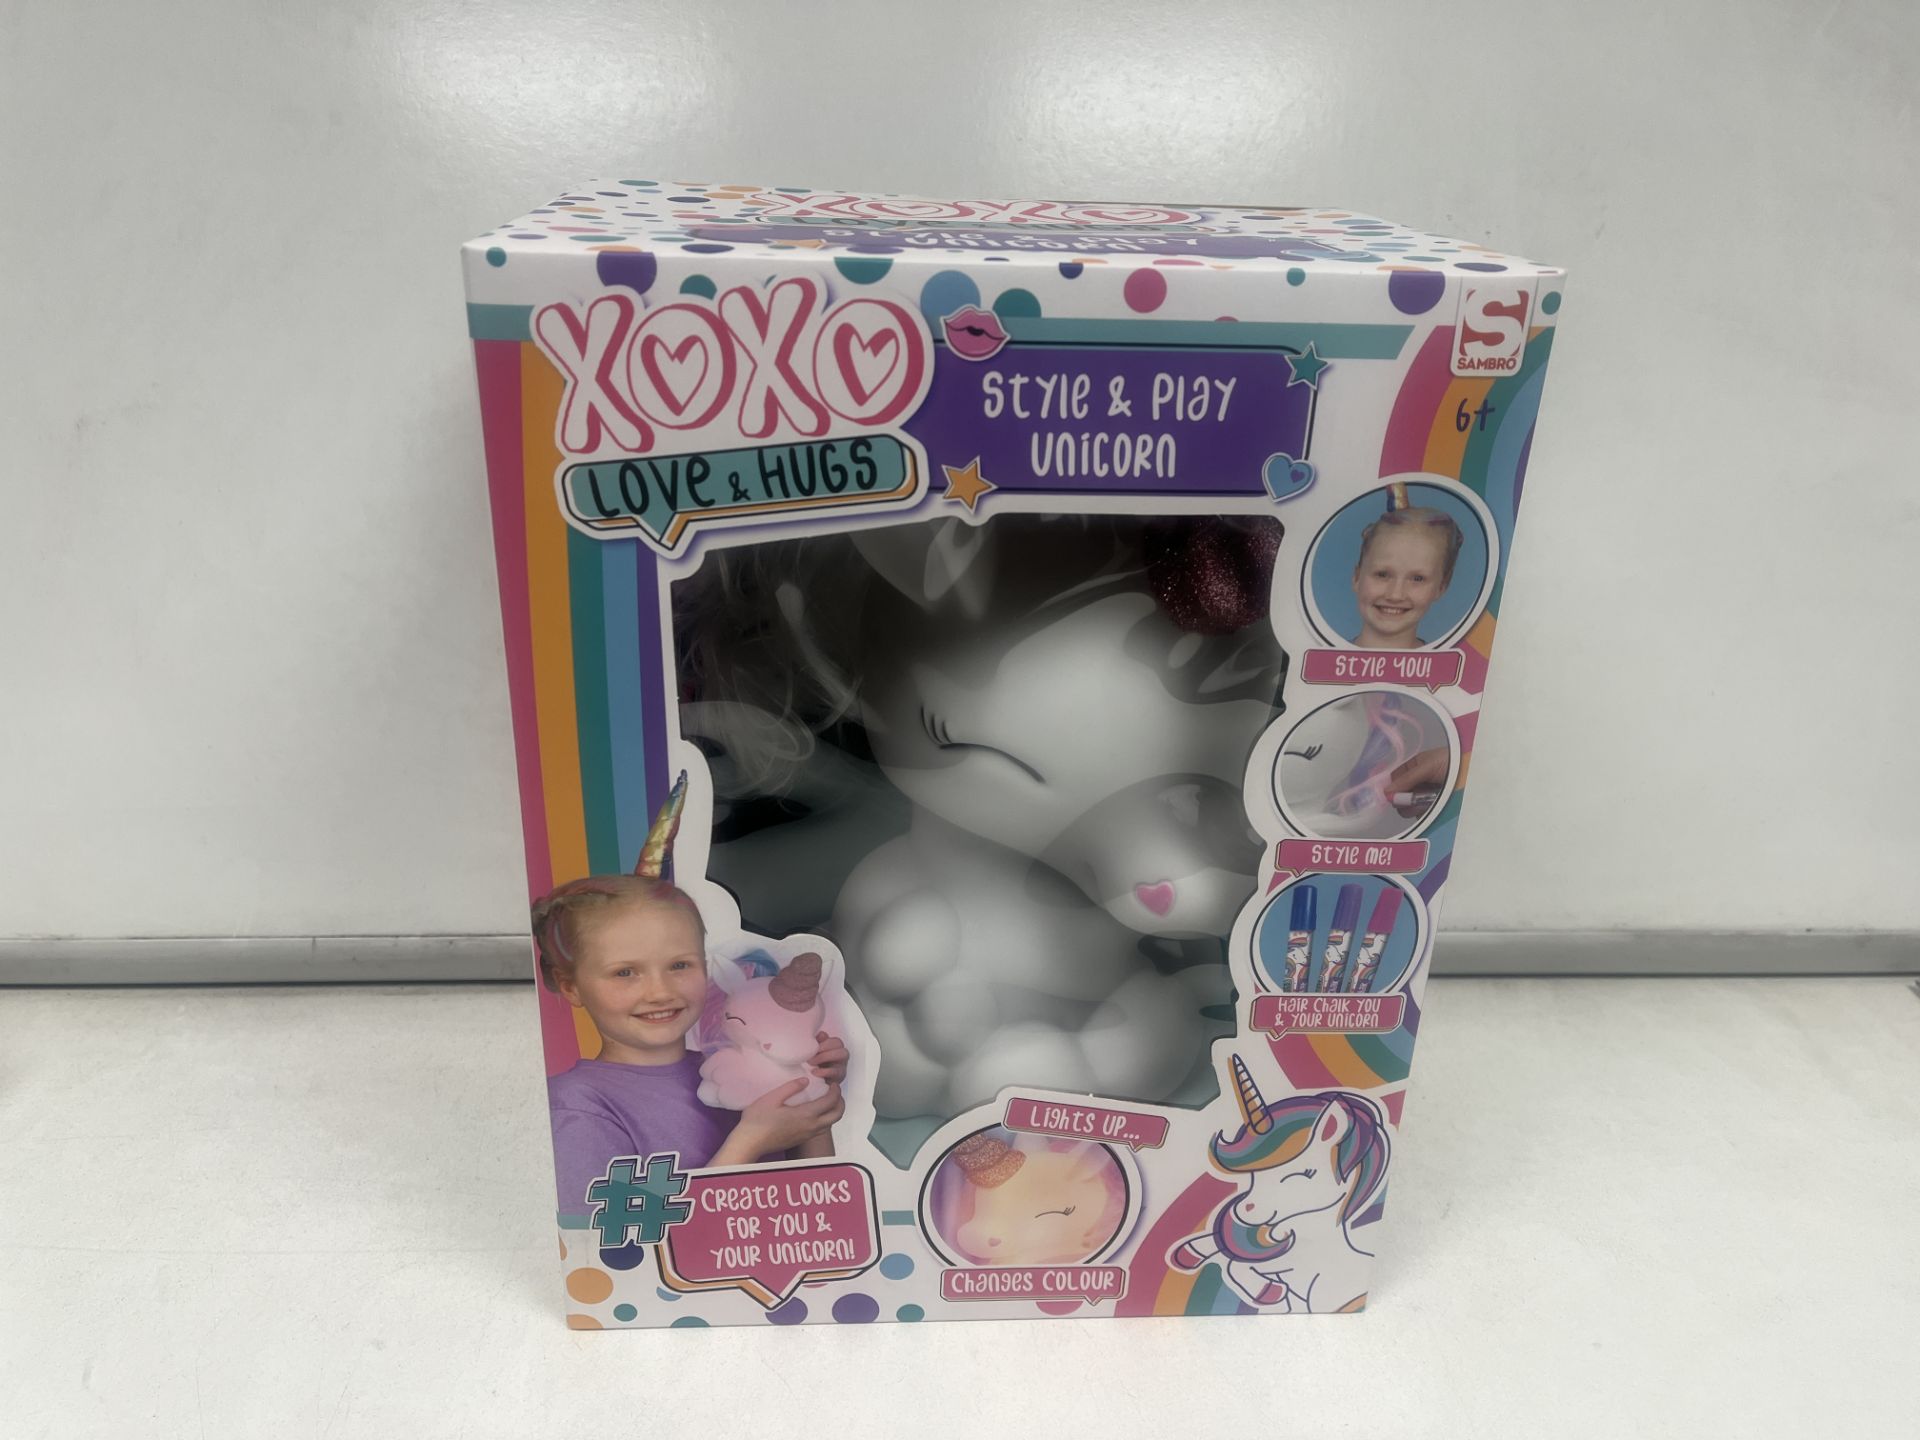 10 x New & Boxed Love & Hugs XOXO | Style and Play Unicorn Night Light | Lights Up & Changes Colour.